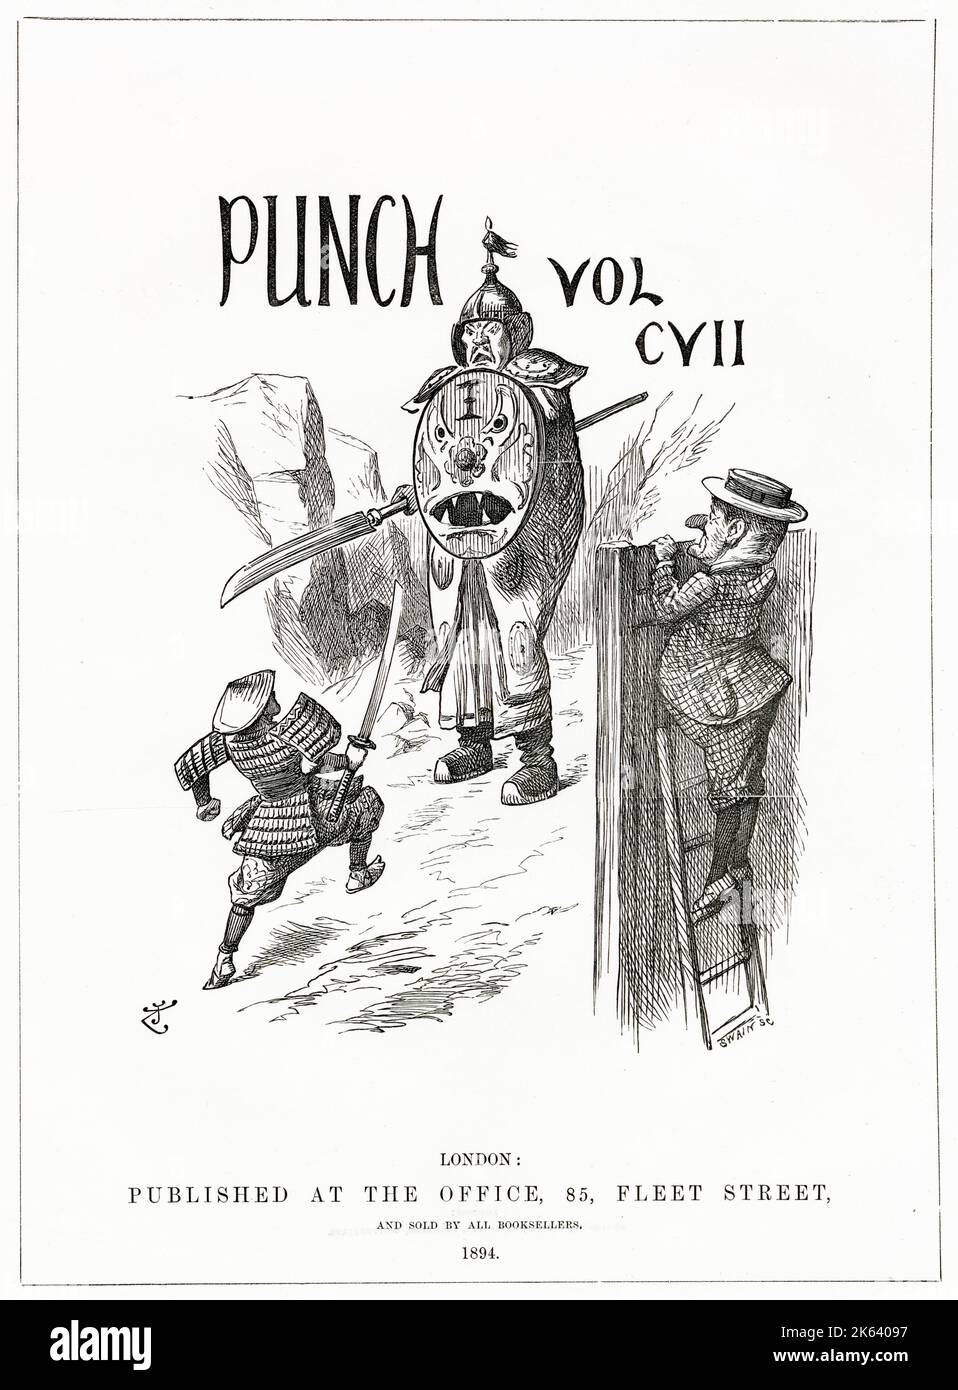 Cartoon at the time of the beginning of the first Sino-Japanese War (July 1894 - September 1895). Europe (represented by Mr Punch) expects China to defeat Japan. Stock Photo